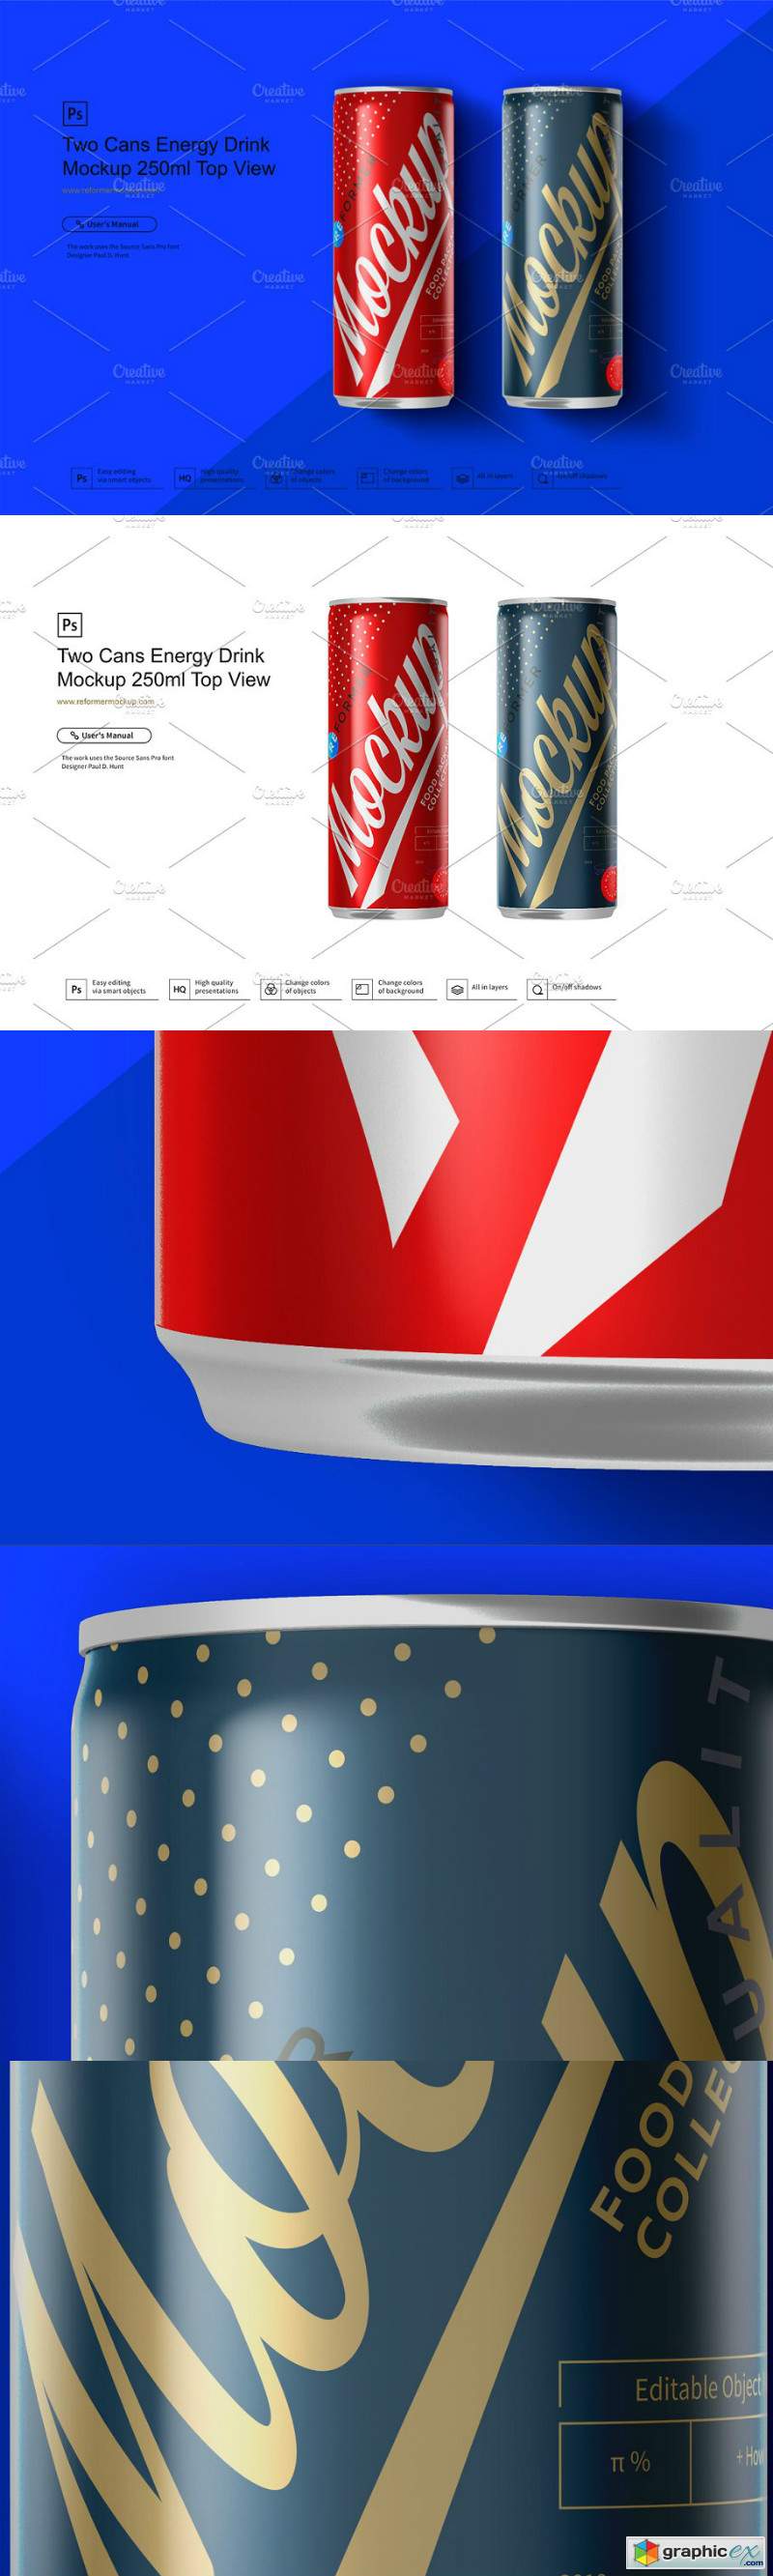 Two Cans Energy Drink Mockup 250ml